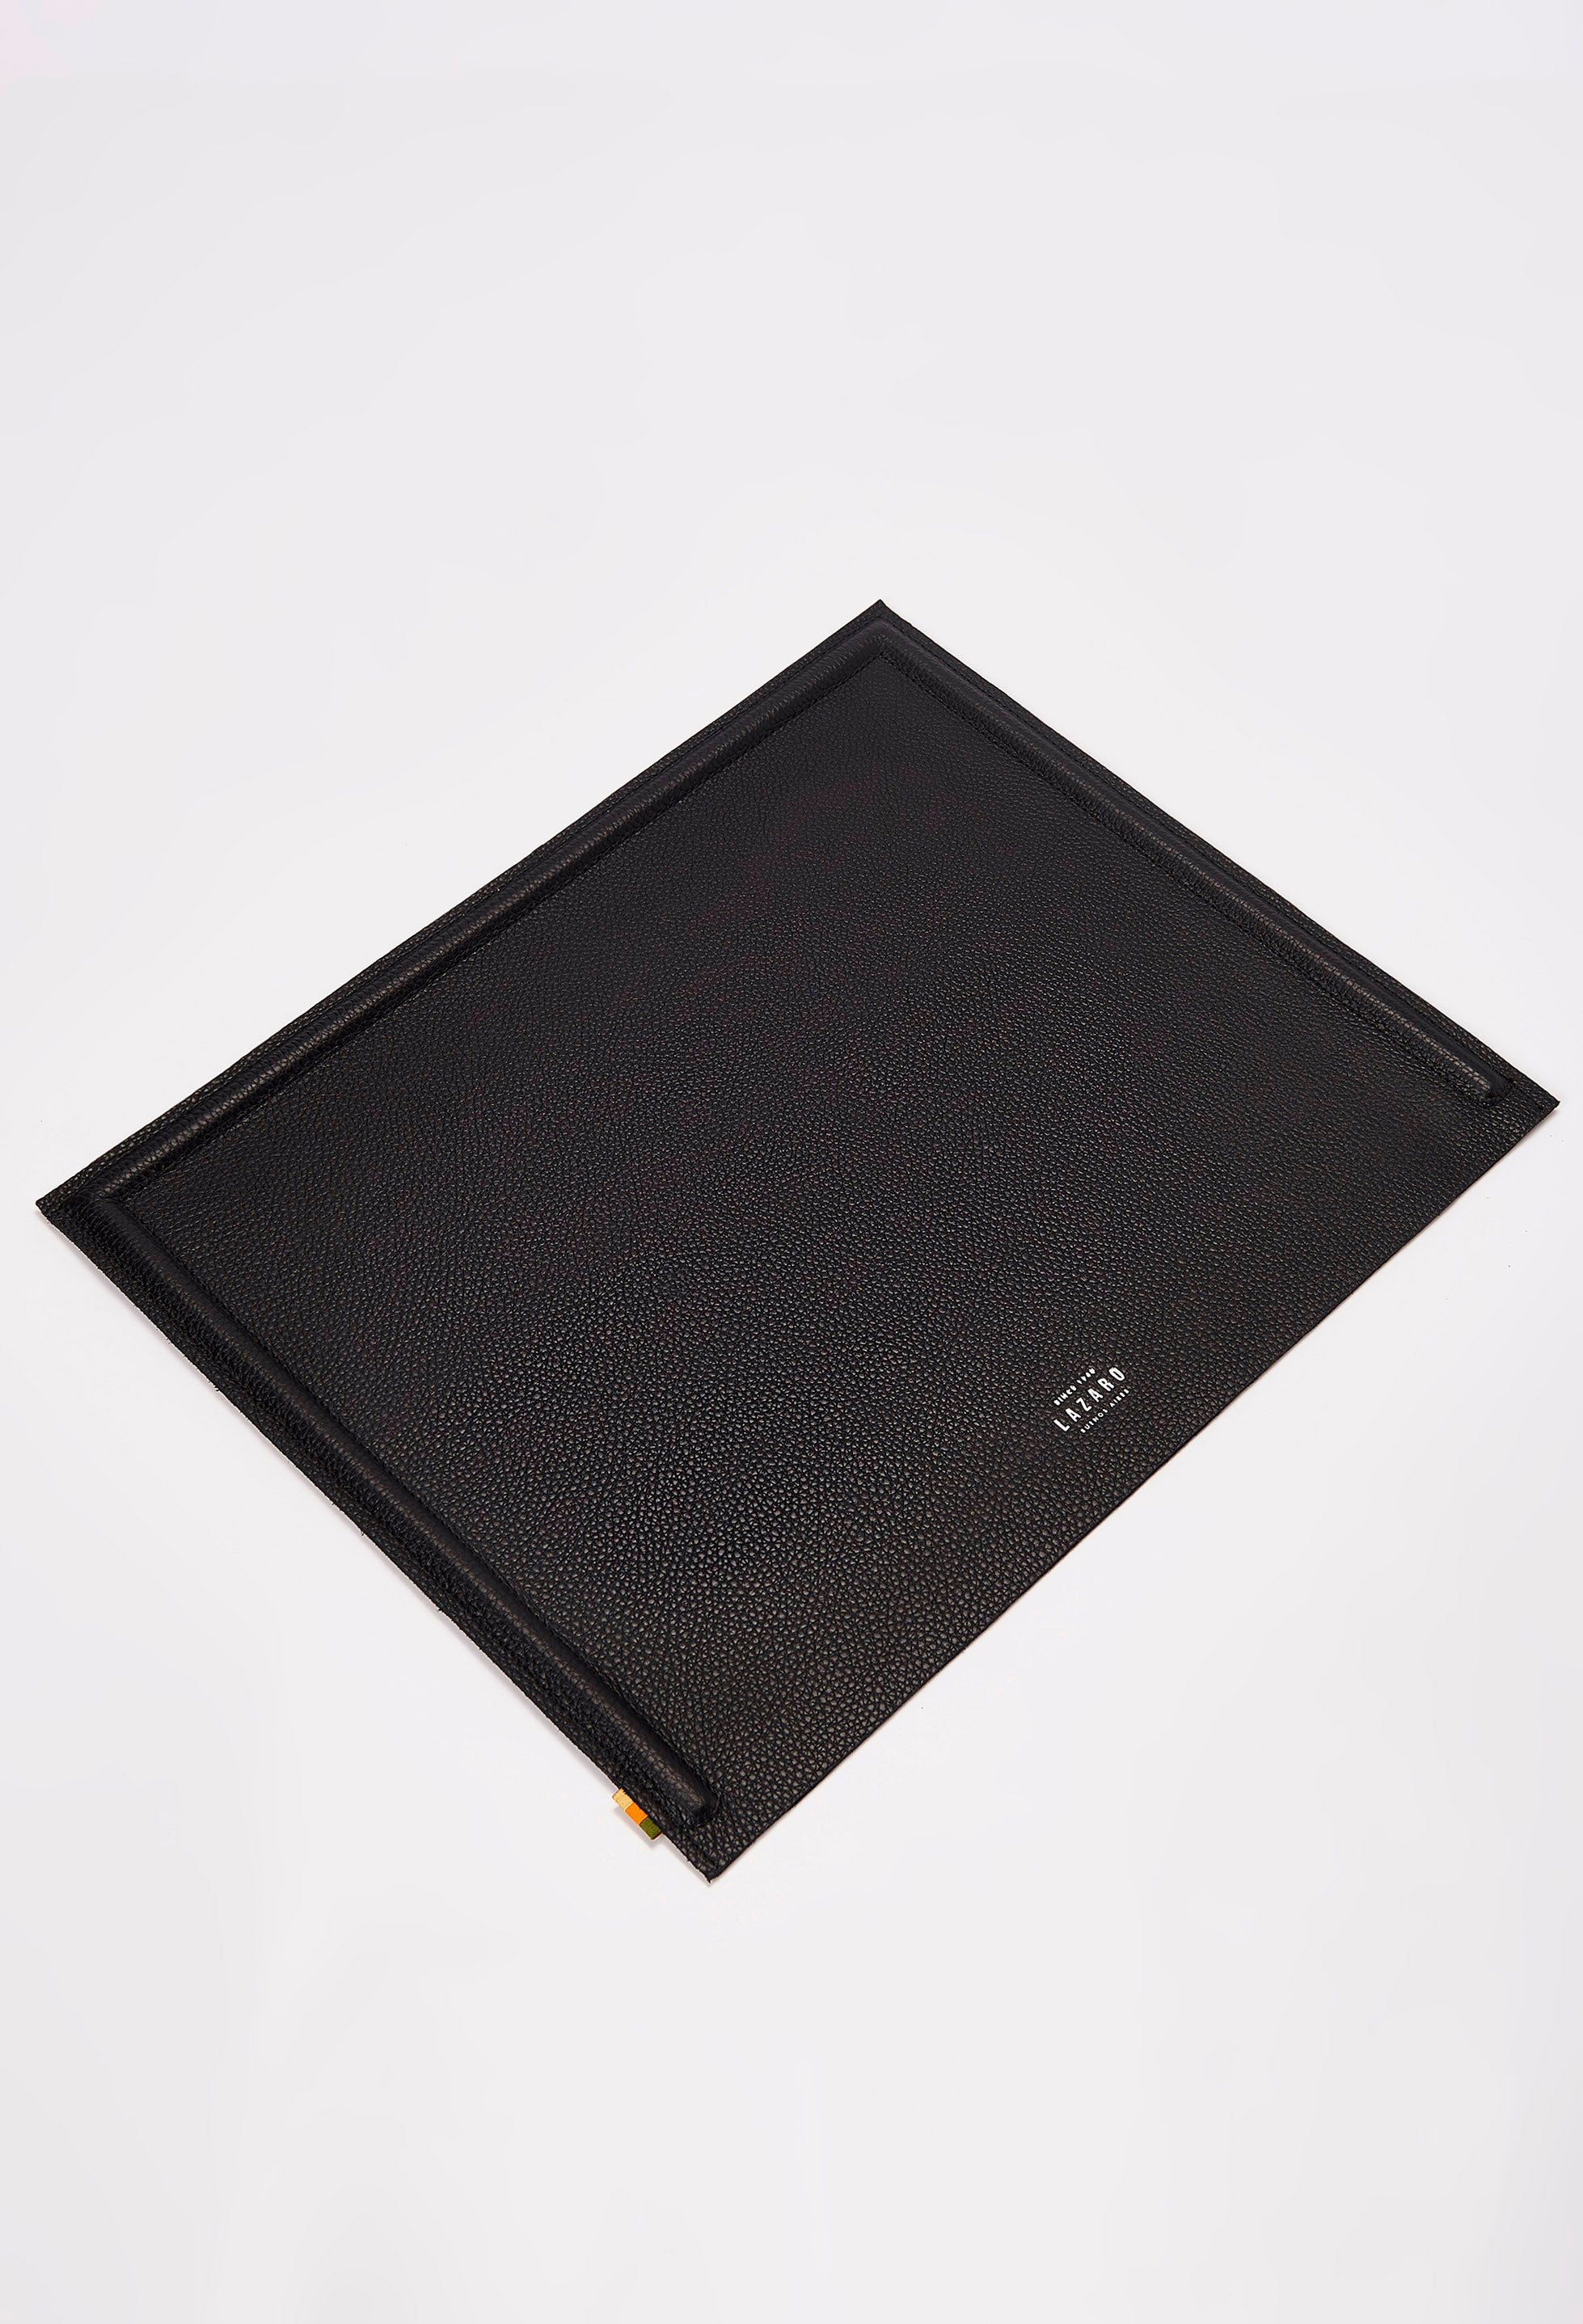 Front of a Black Leather Minimalist Desk Mat with embossed Lazaro logo on it.